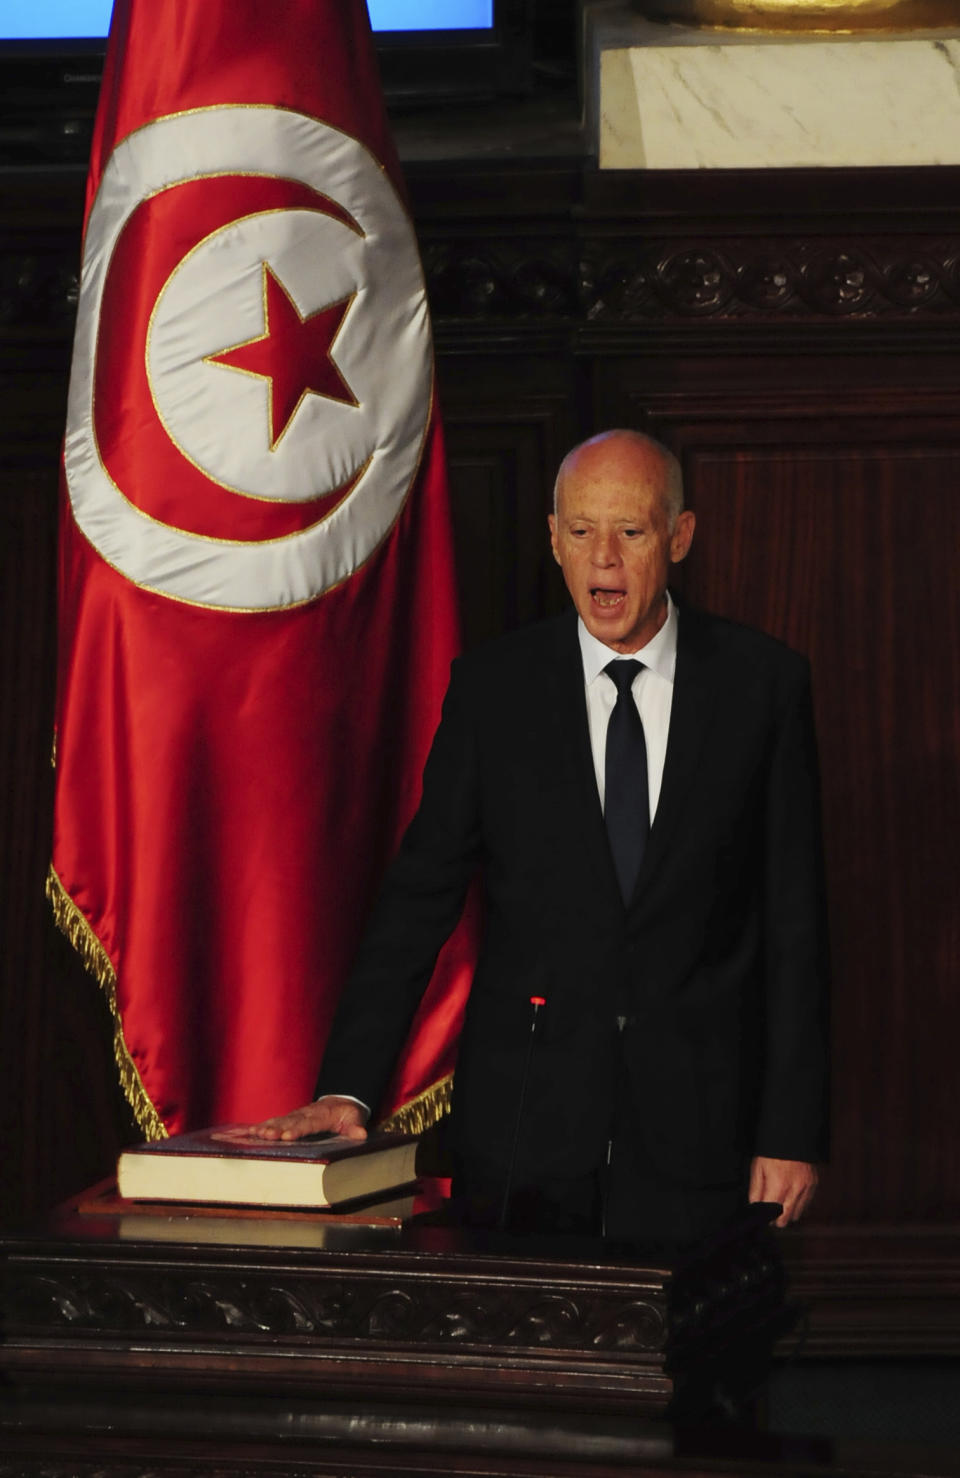 Newly elected Tunisian President Kais Saied puts his hand on the Quran to be sworn in as Tunisian President , in Tunis, Wednesday Oct.23, 2019. Tunisians elected former law professor Kais Saied as president earlier this month to replace President Beji Caid Essebsi, who died in July. (AP Photo/Hassene Dridi)